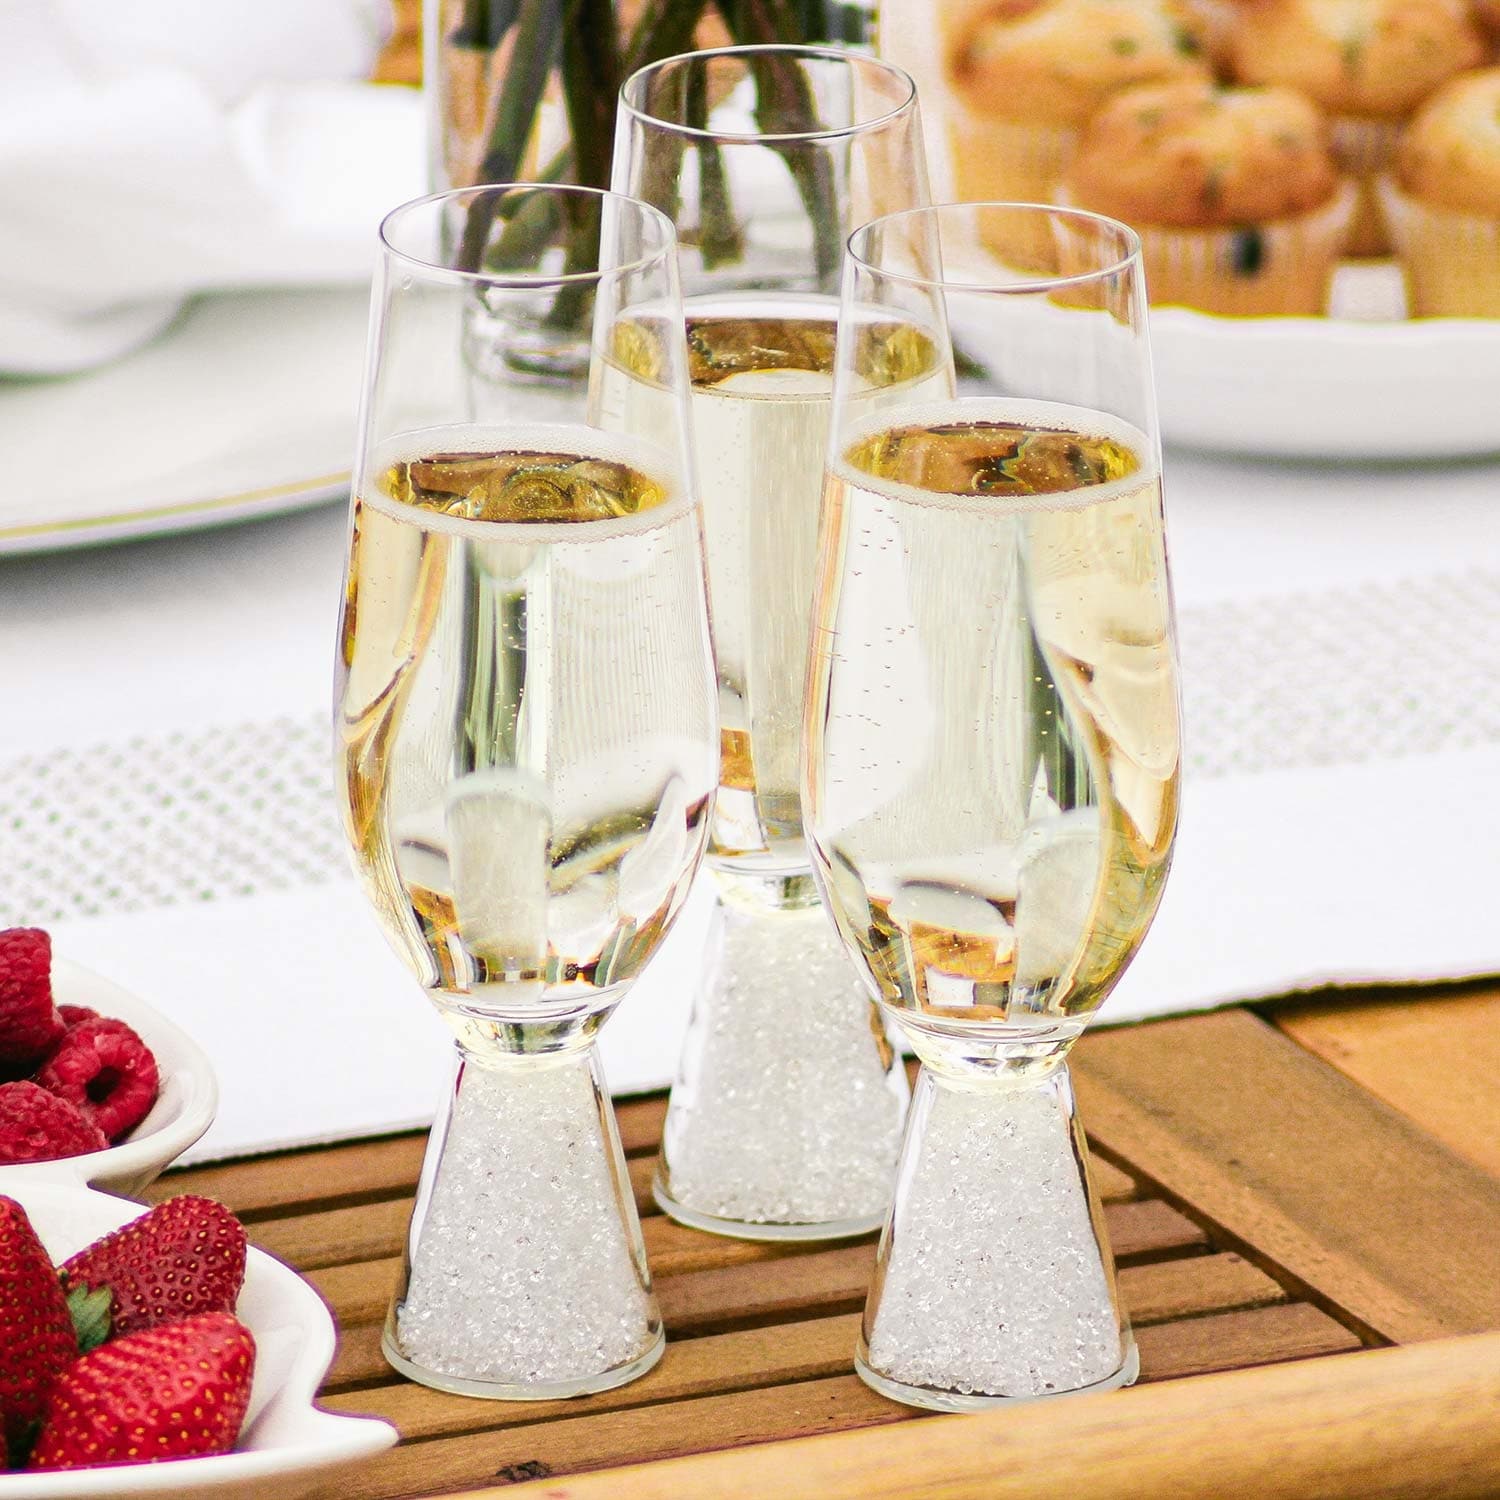 https://ak1.ostkcdn.com/images/products/is/images/direct/52d5e77be6c3f321a9bd61c32ec5e0c1e50298f1/Sparkles-Home-Rhinestone-Stemless-Crystal-Filled-Champagne-Flute---Set-of-6.jpg